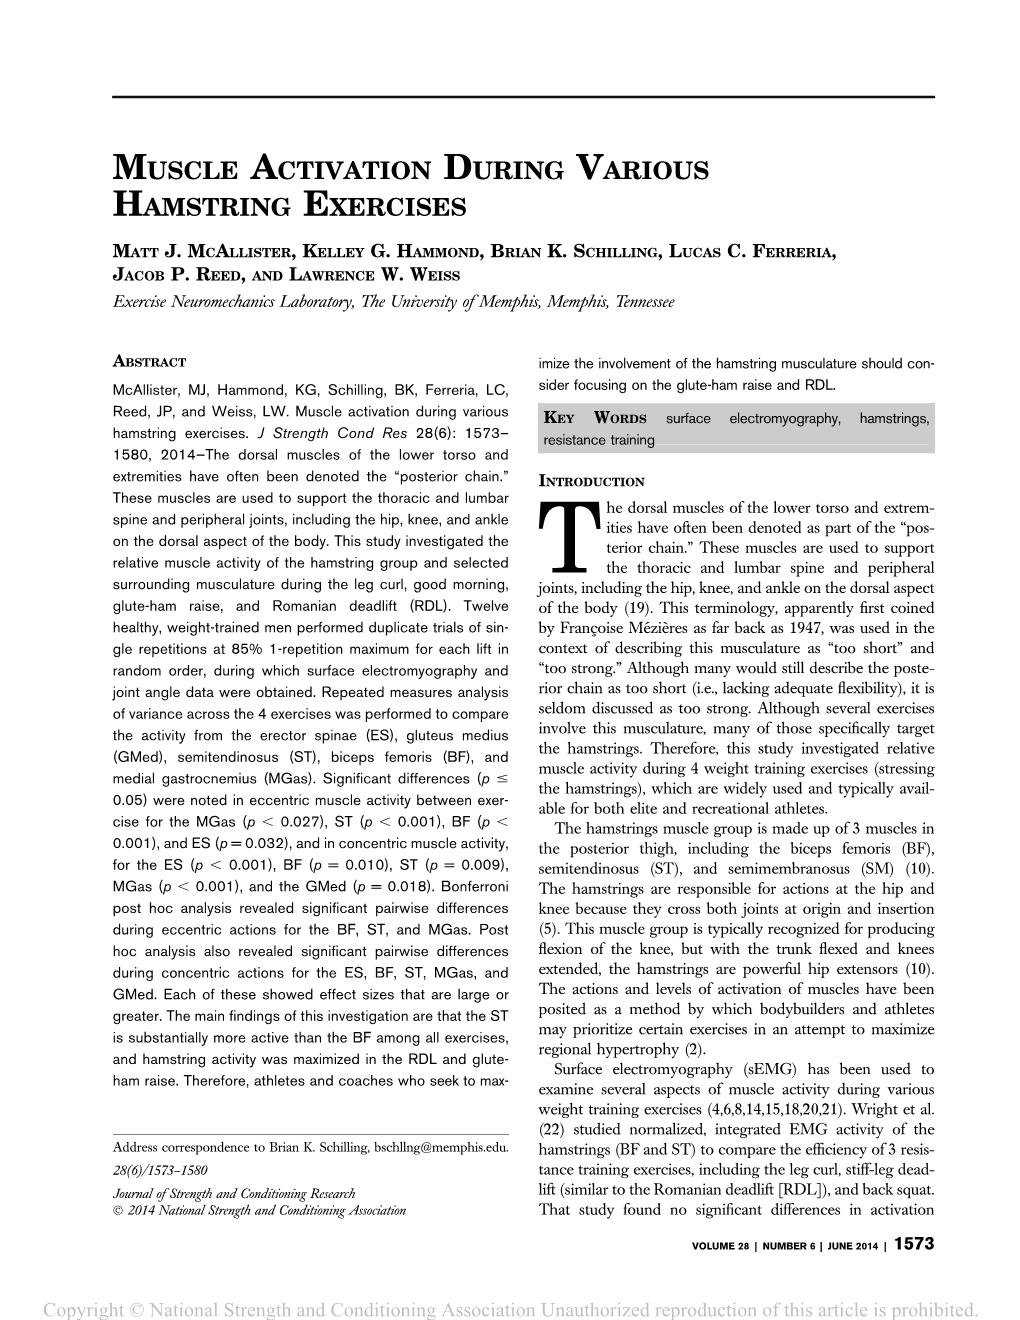 Muscle Activation During Various Hamstring Exercises